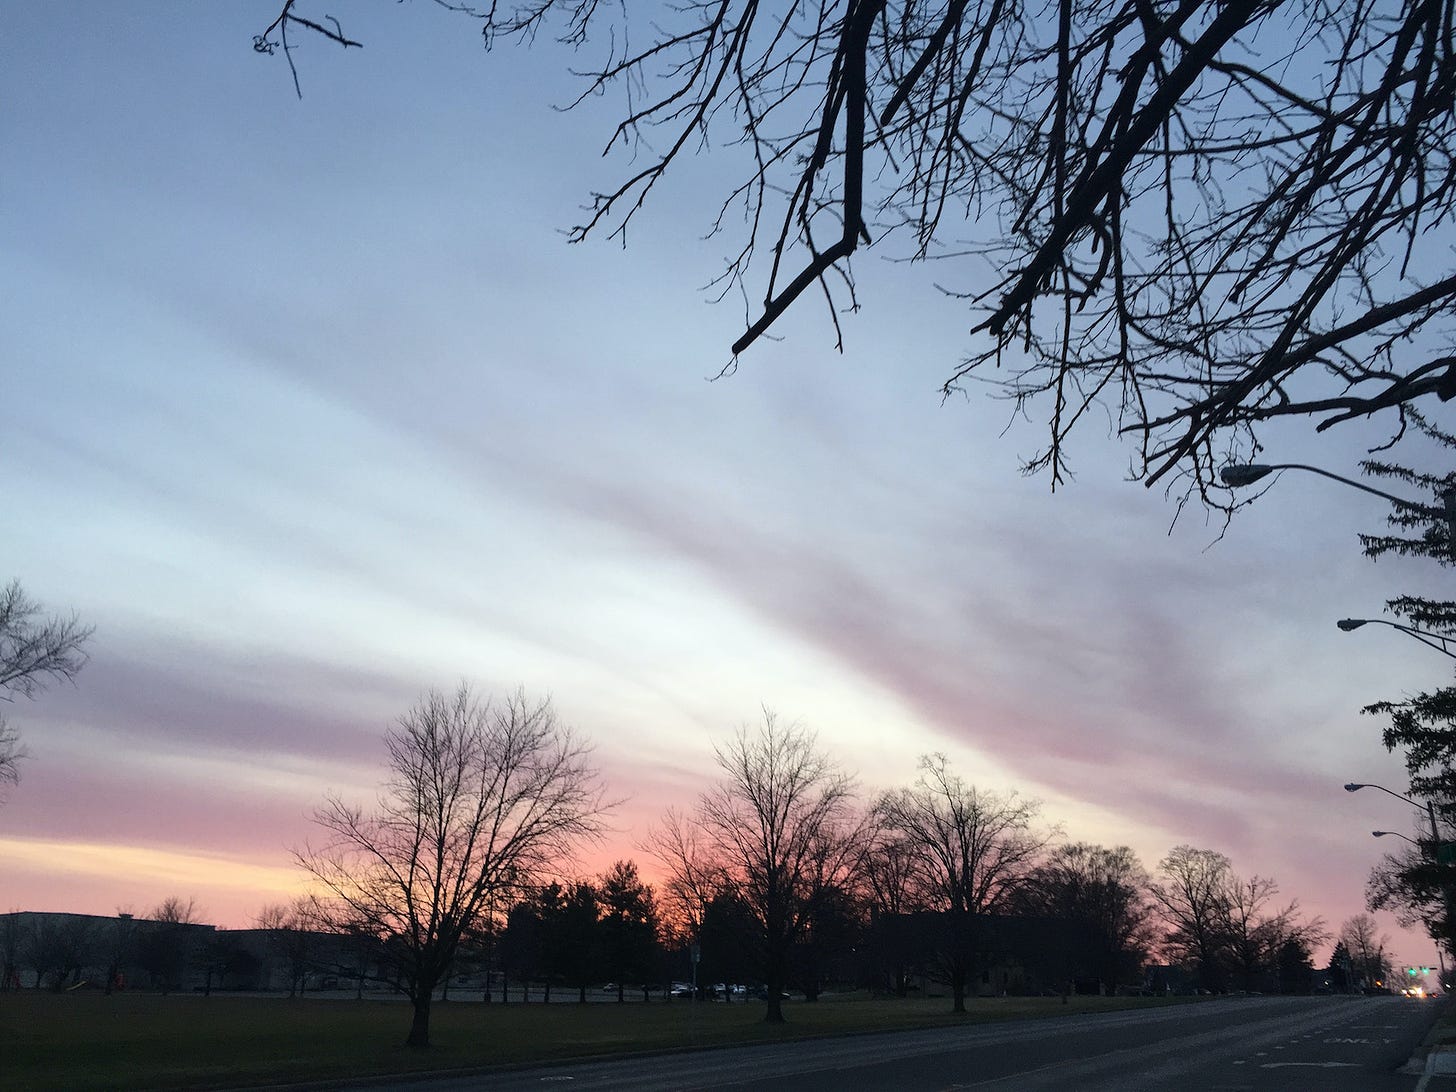 Tree branches in the foreground and trees on the horizon; sunset color fading in a sky containing streaks of cloud